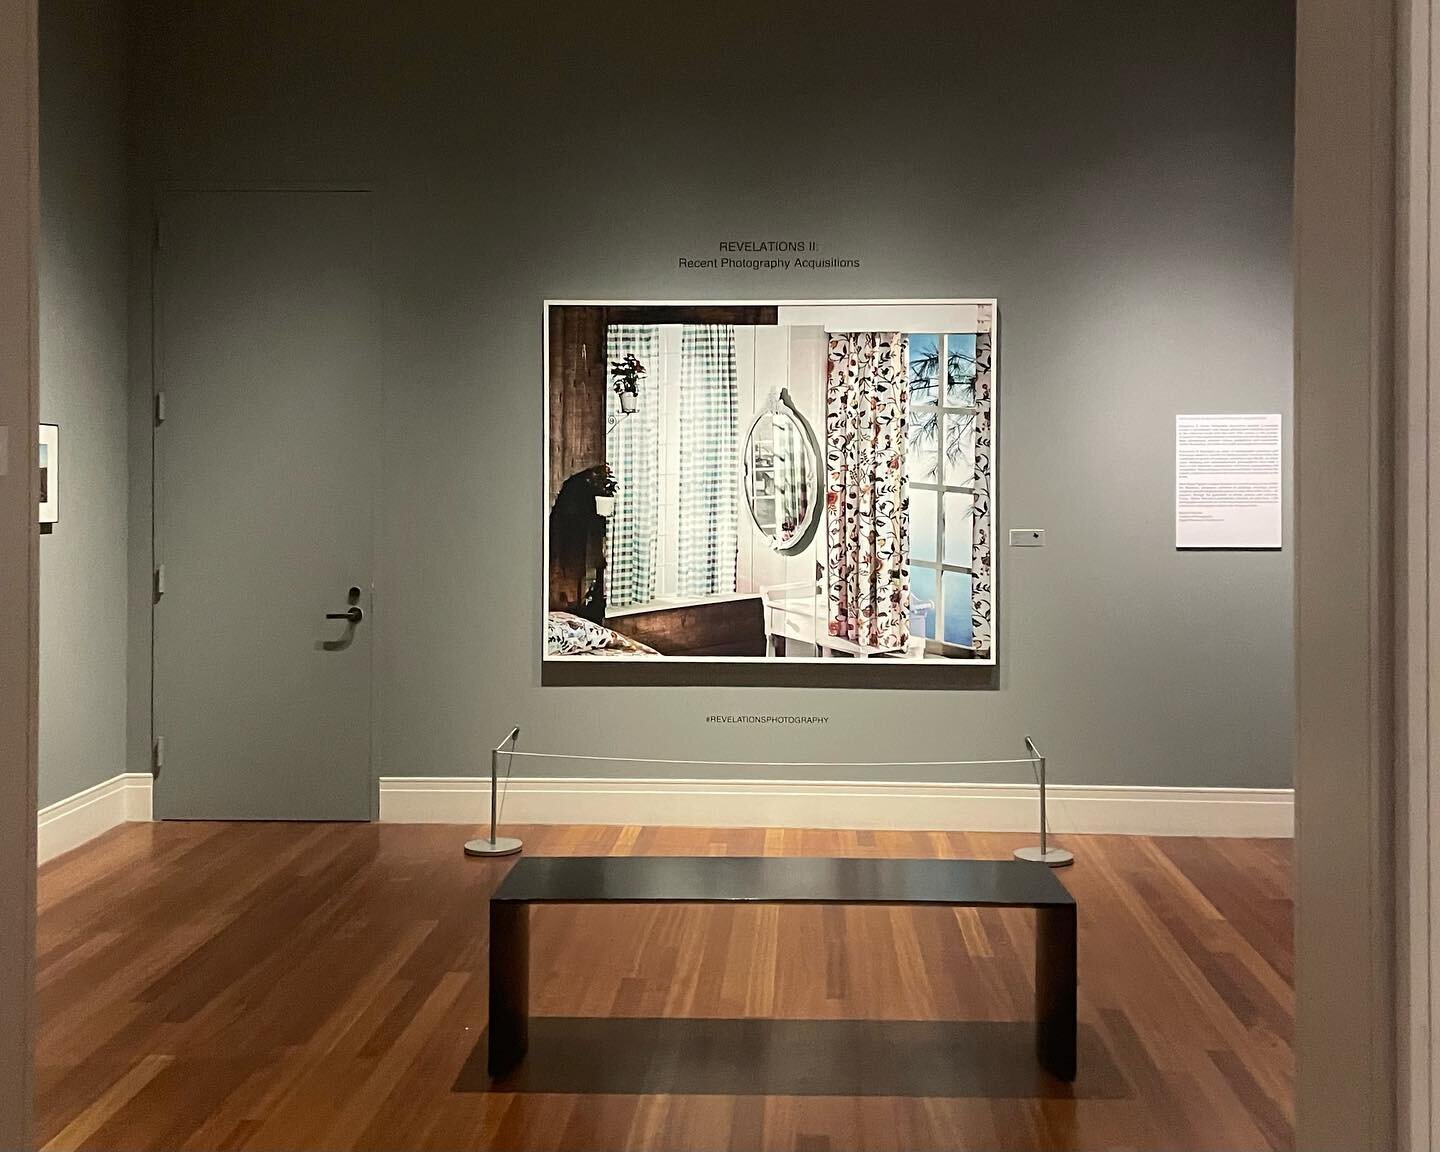 Dwelling #3 installed in the @ogdenmuseum nearly two years ago. This 60x75 inch print, along with Dwelling #9 lives in their permanent collection. 

&ldquo;Dwelling reimagines photographs commissioned by J.C. Penney during the 1970s for use in their 